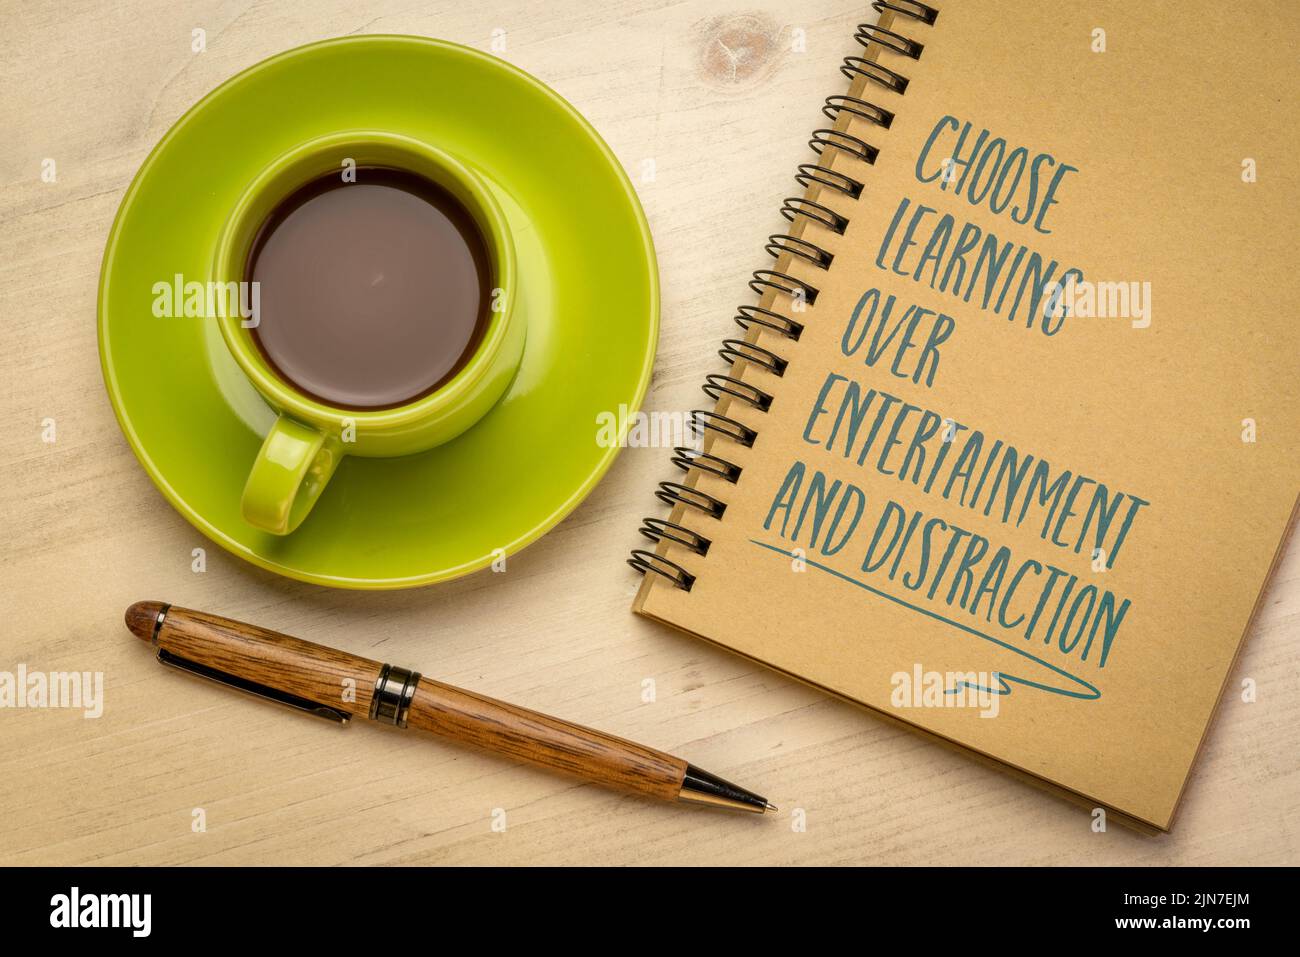 Choose learning over entertainment and distraction - inspirational note in a notebook, flat lay with coffee, learning and personal development concept Stock Photo